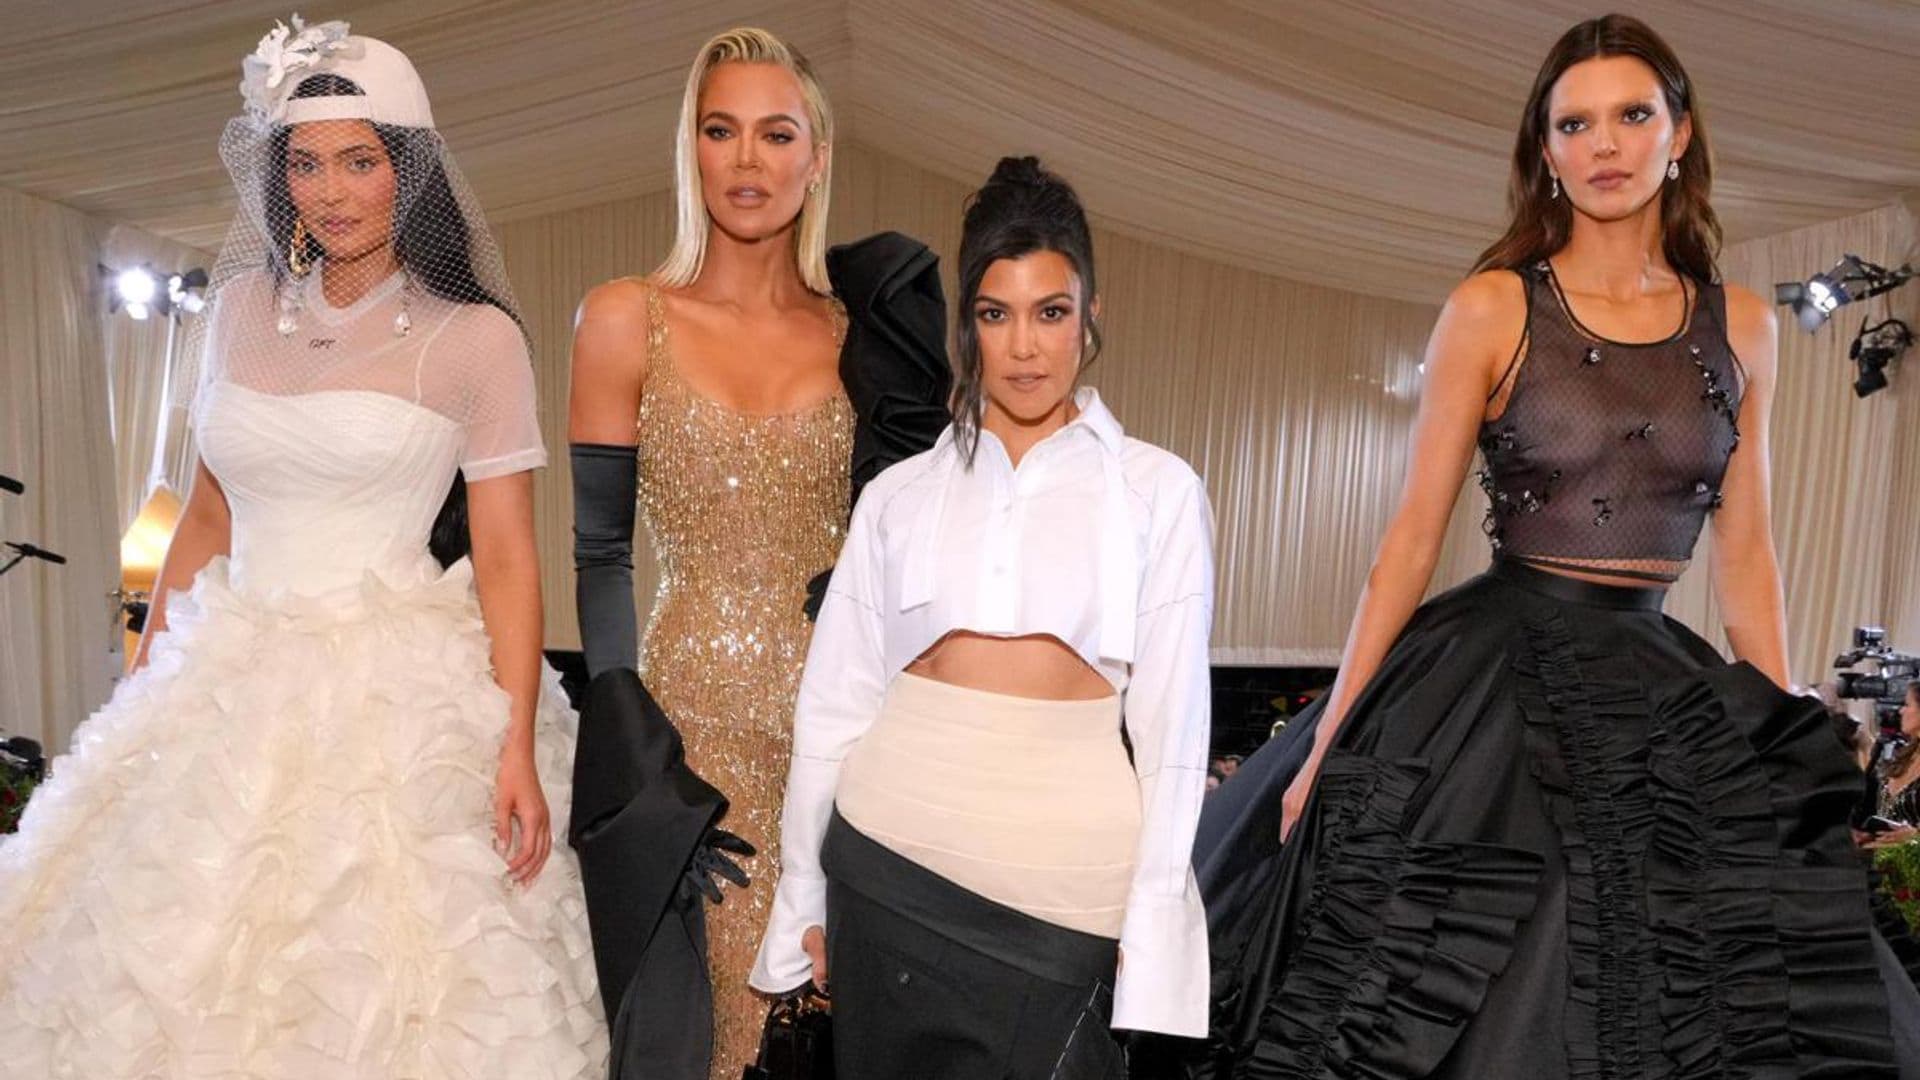 Only one Kardashian/Jenner is reportedly confirmed for the Met Gala: More stars on the list